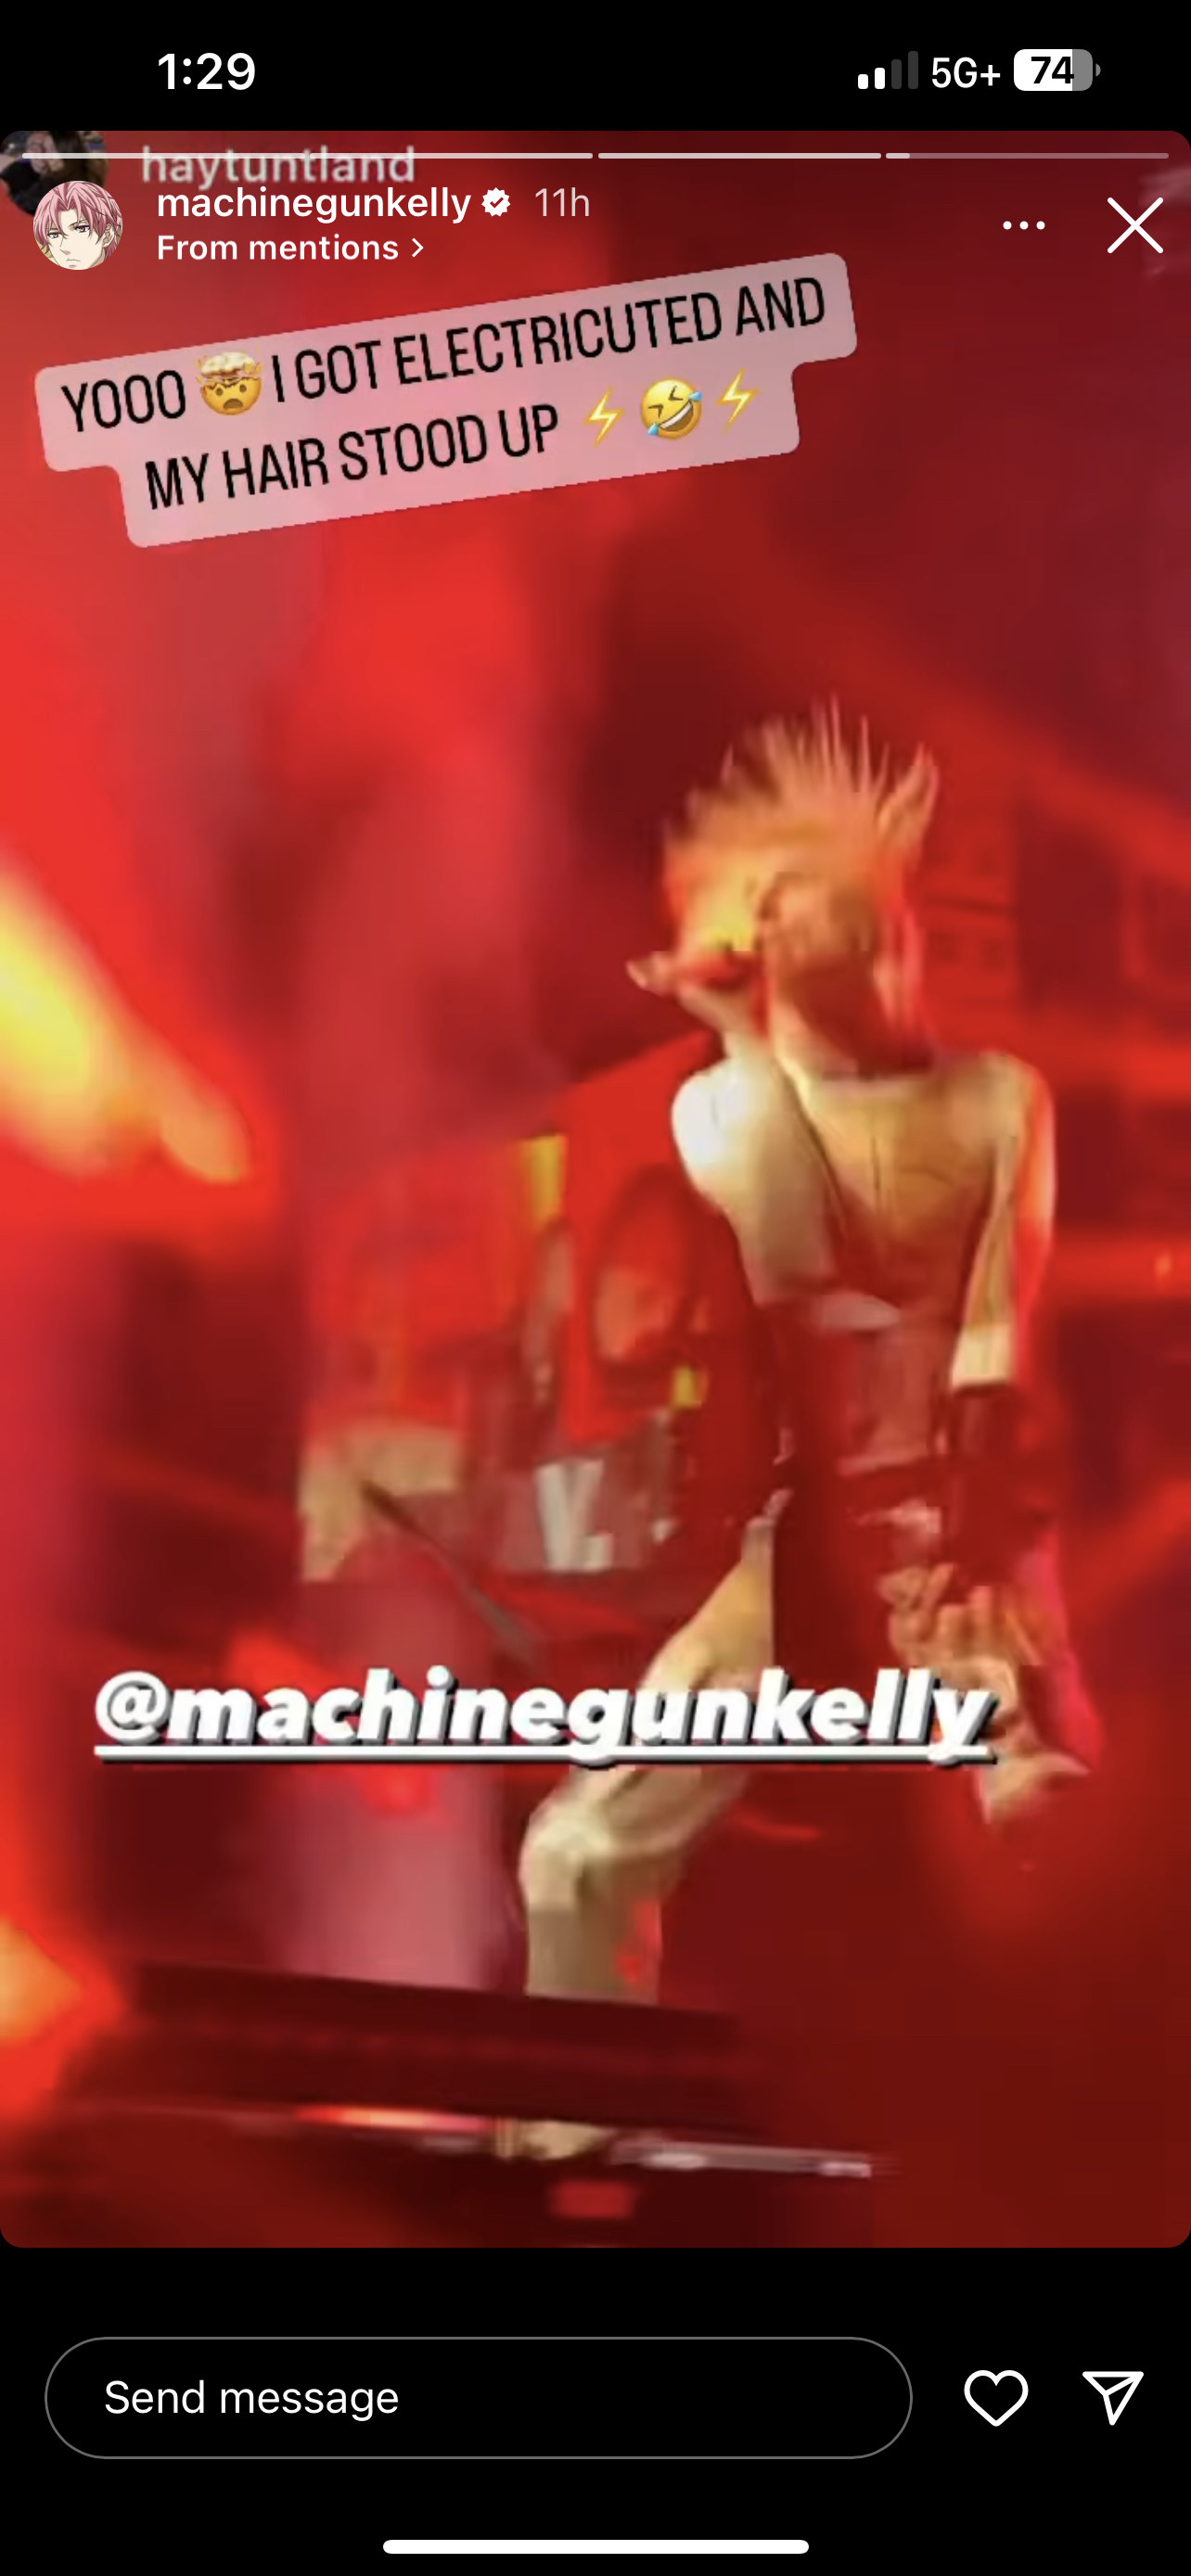 machine gun kelly performing and his hair standing straight up